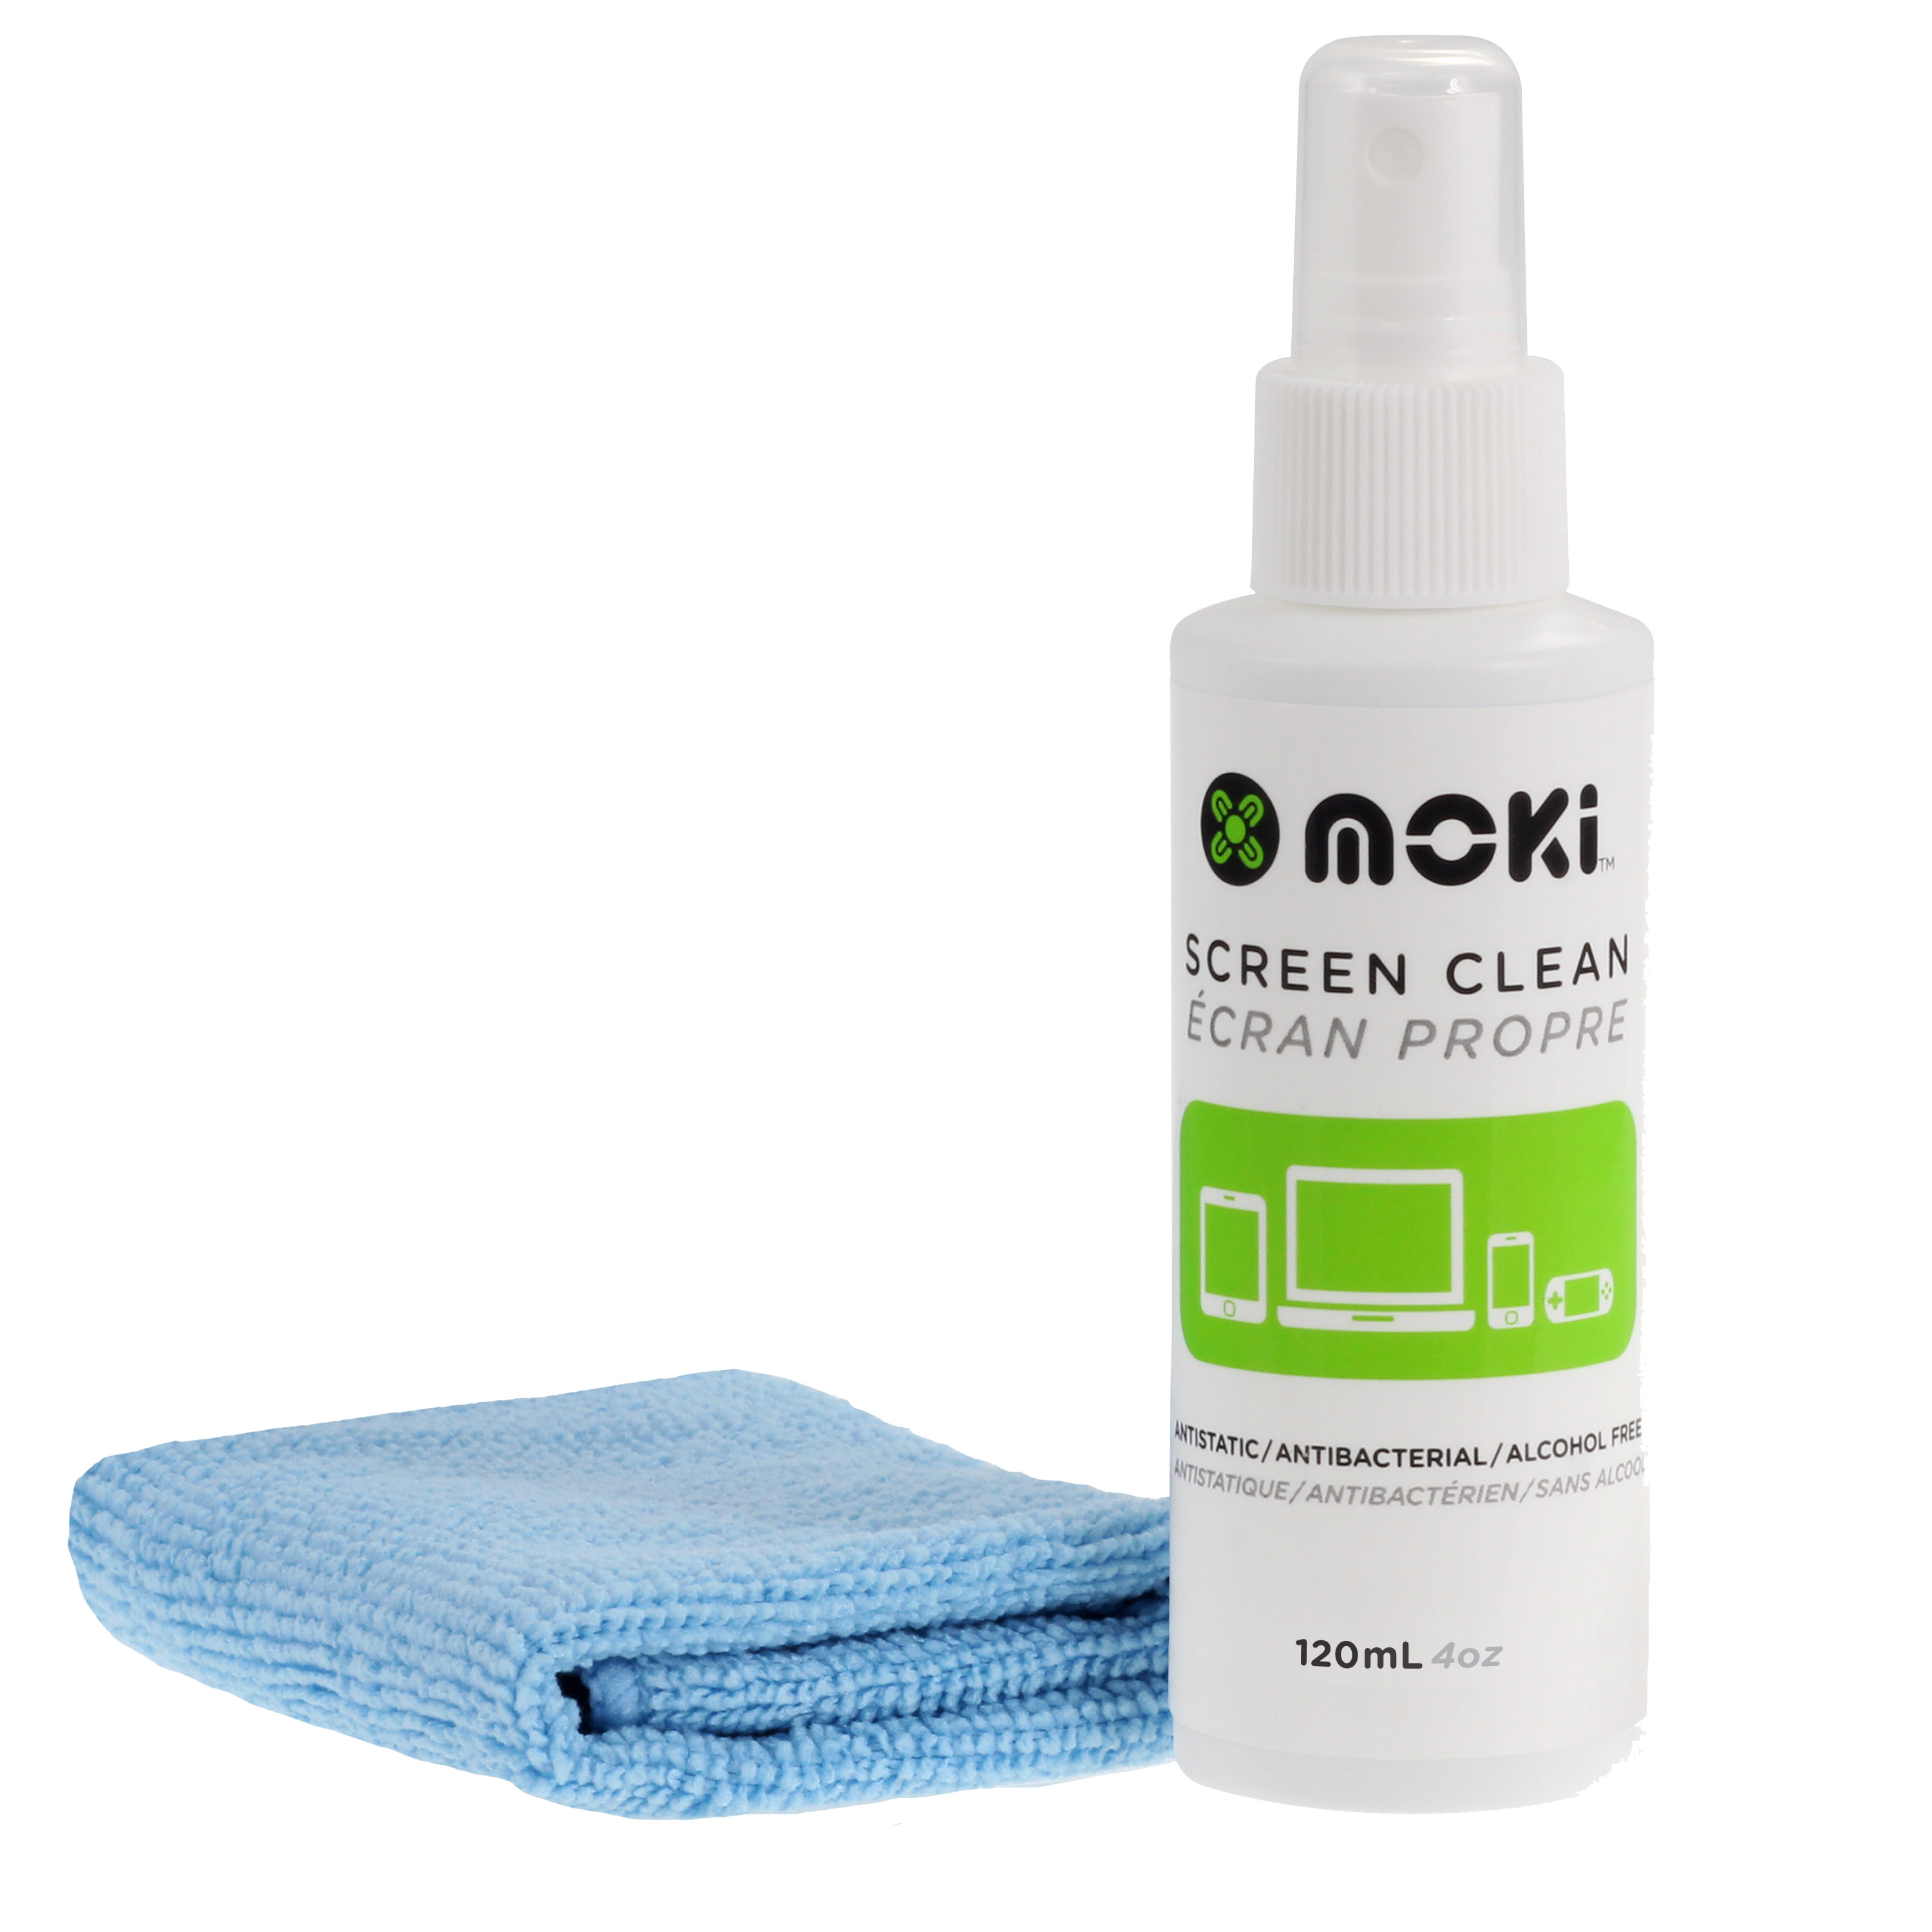 EAN 9328854001082 product image for ACCFCSM02 Screen Clean Spray 120ml with Cloth Wipe - Blue | upcitemdb.com